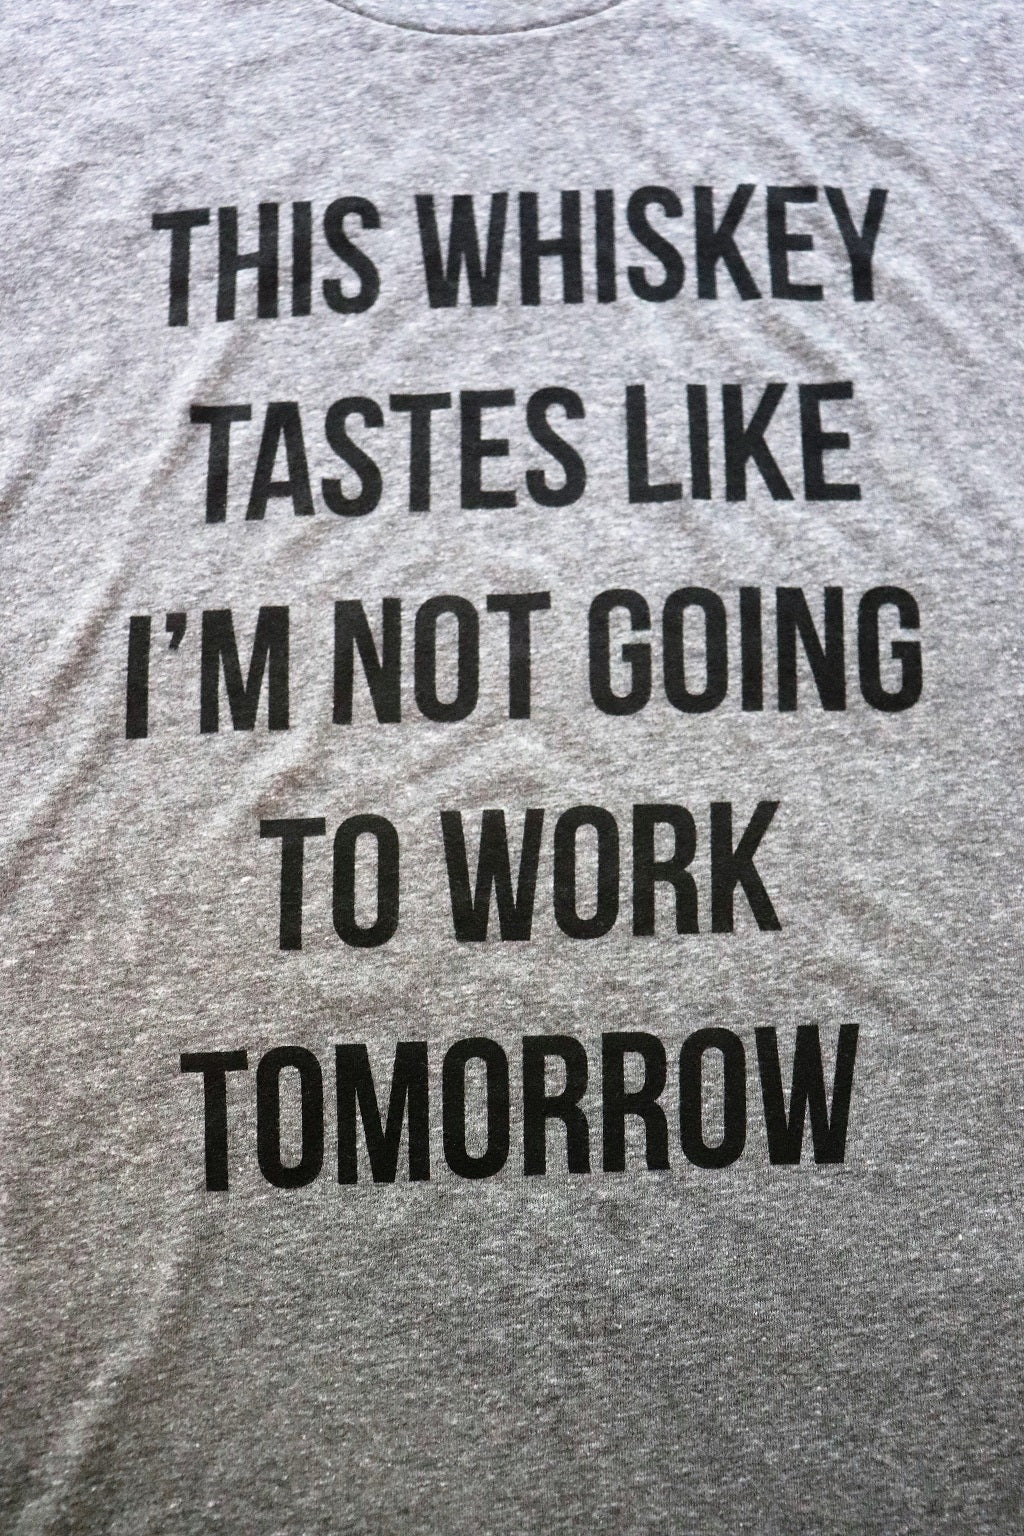 This Whiskey Tastes Like I'm Not Going To Work Tomorrow - KC Shirts